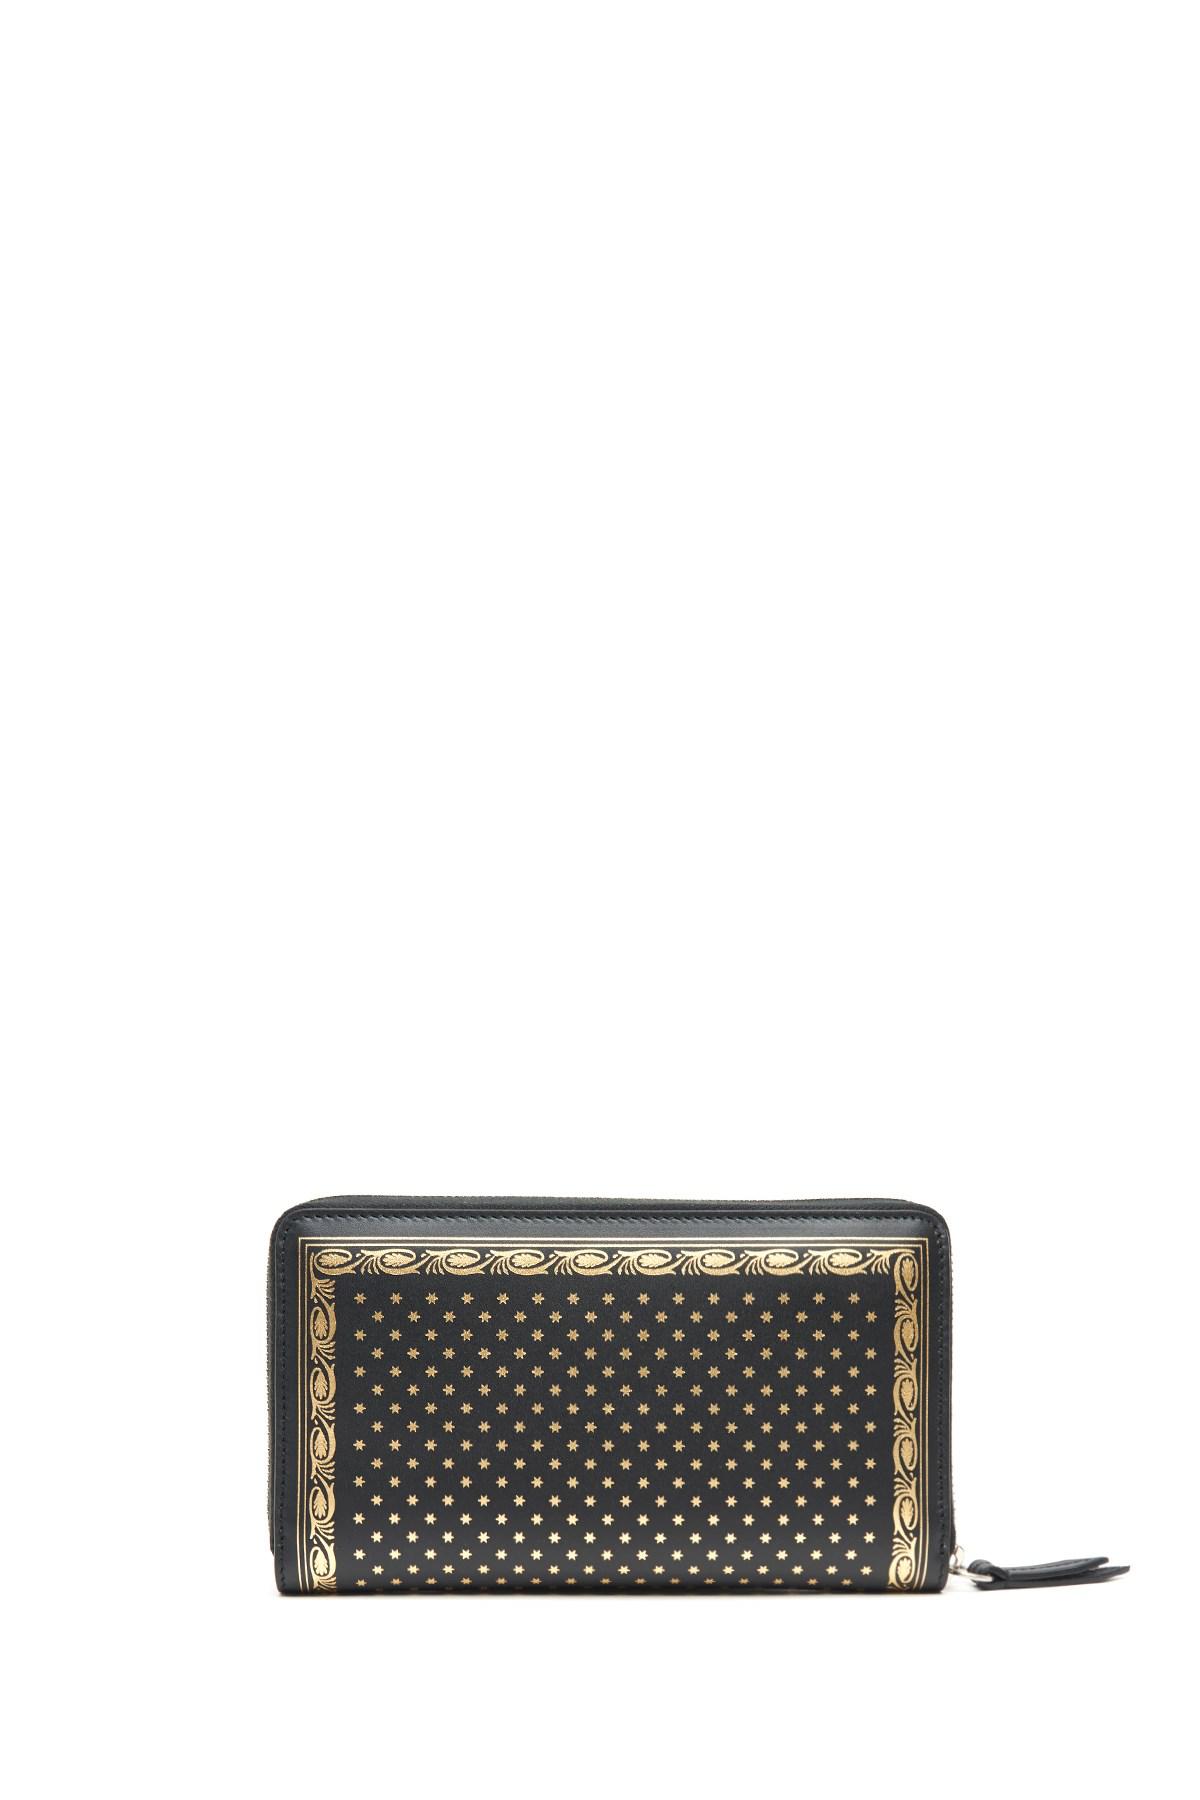 Gucci &#39;guccy&#39; Wallet in Black for Men - Lyst